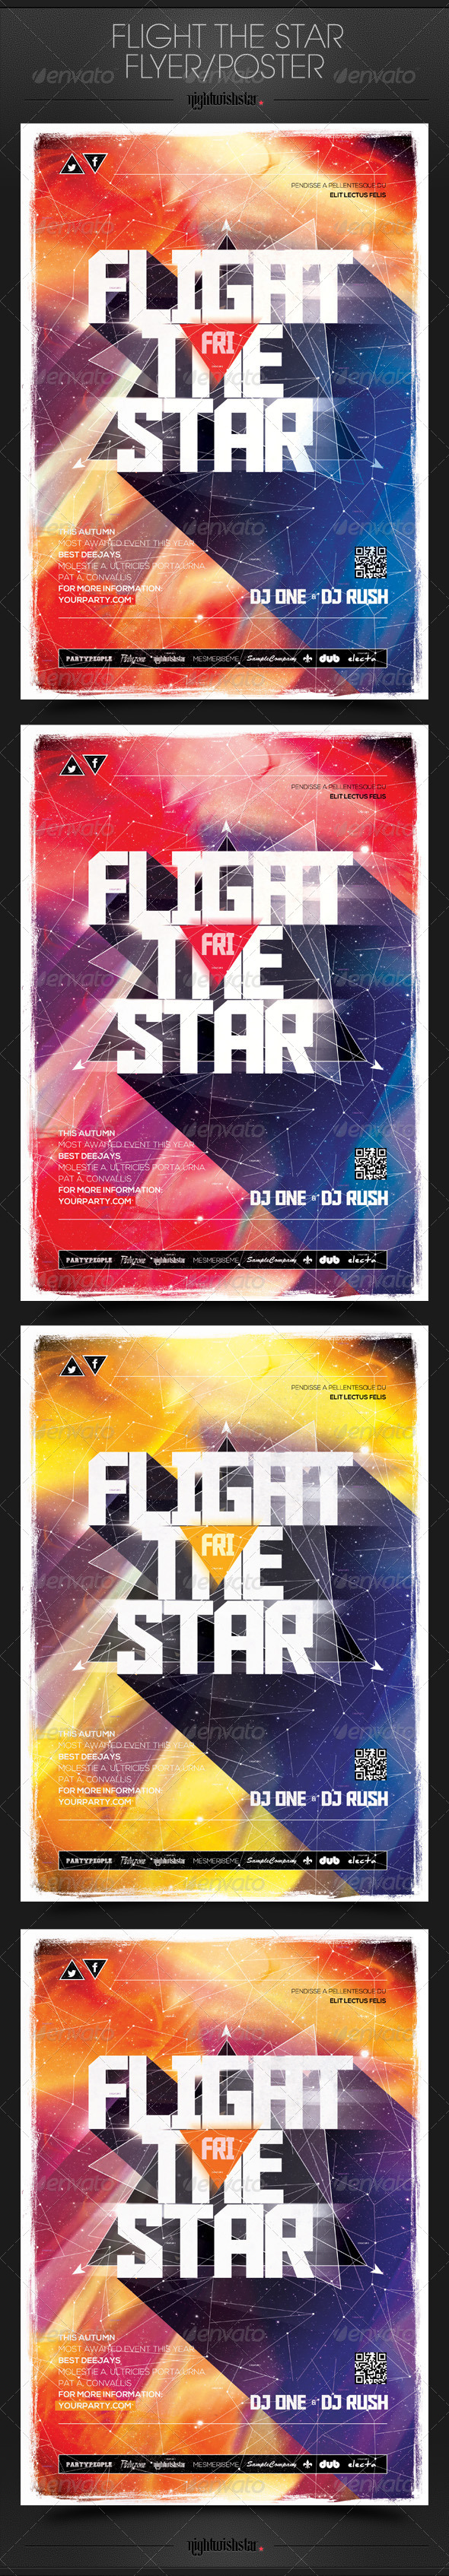 Flight Star Party Poster/Flyer (Clubs & Parties)